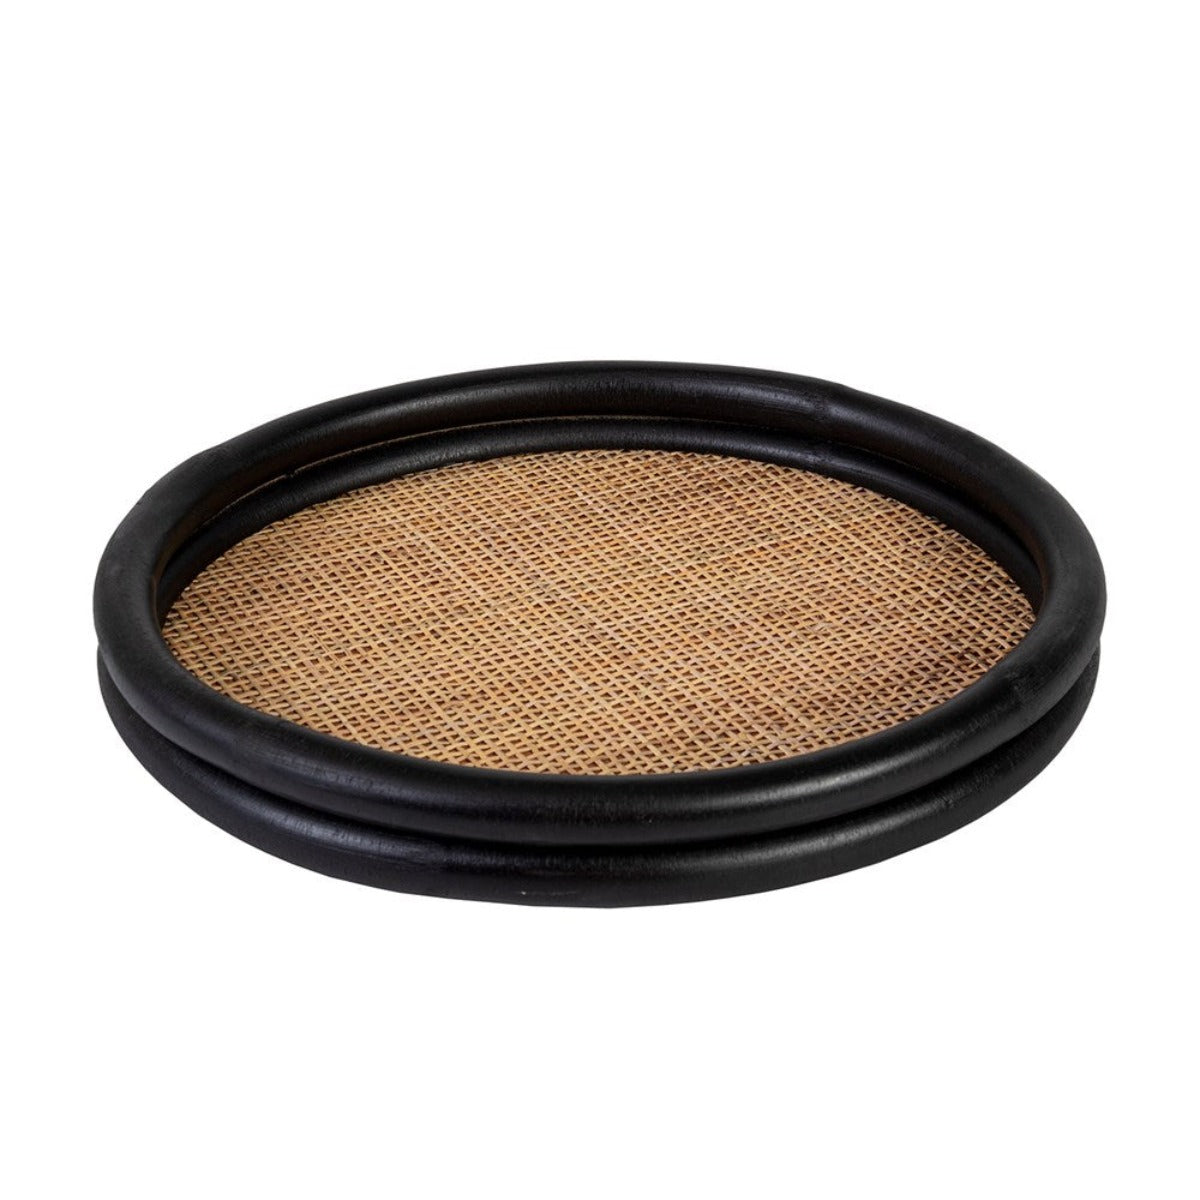 RATTAN TRAY WITH WOVEN BASE 50 X 400MM DIA BLACK/NATURAL